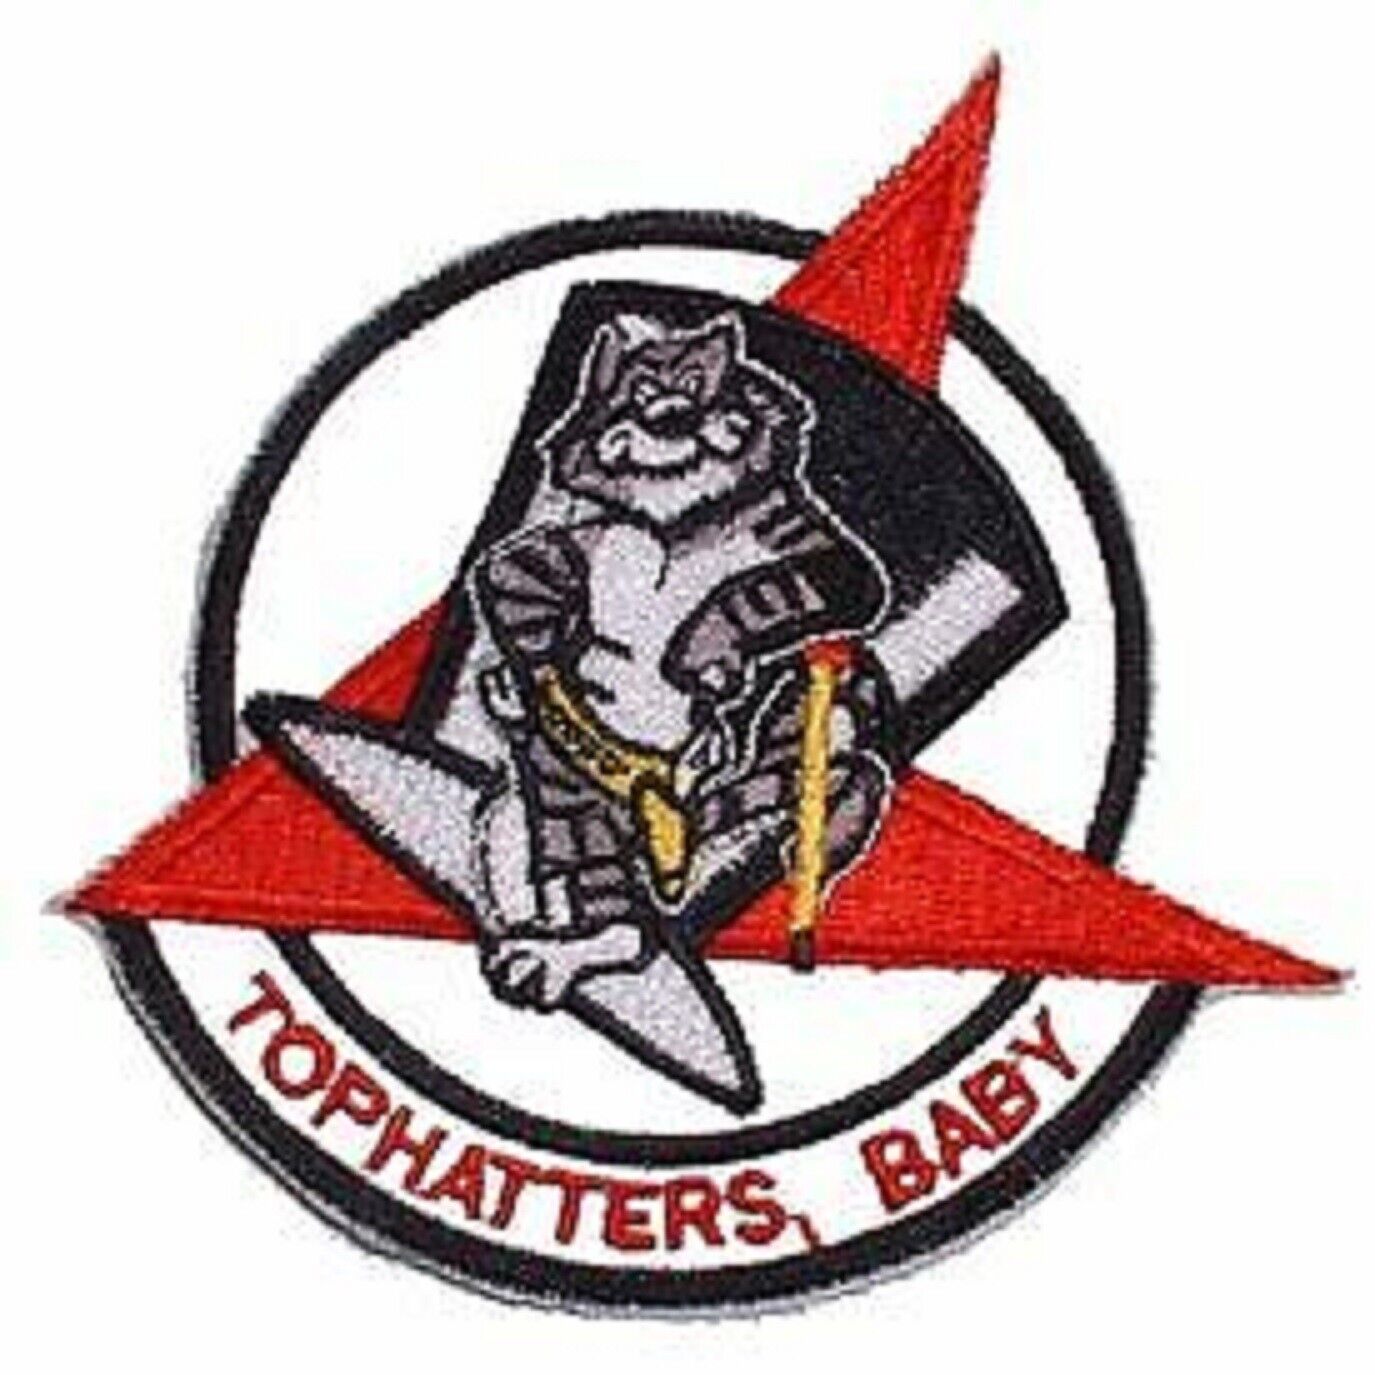 NAVY VF-14 TOPHATTERS BABY F-14 TOMCAT MILITARY EMBROIDERED  PATCH